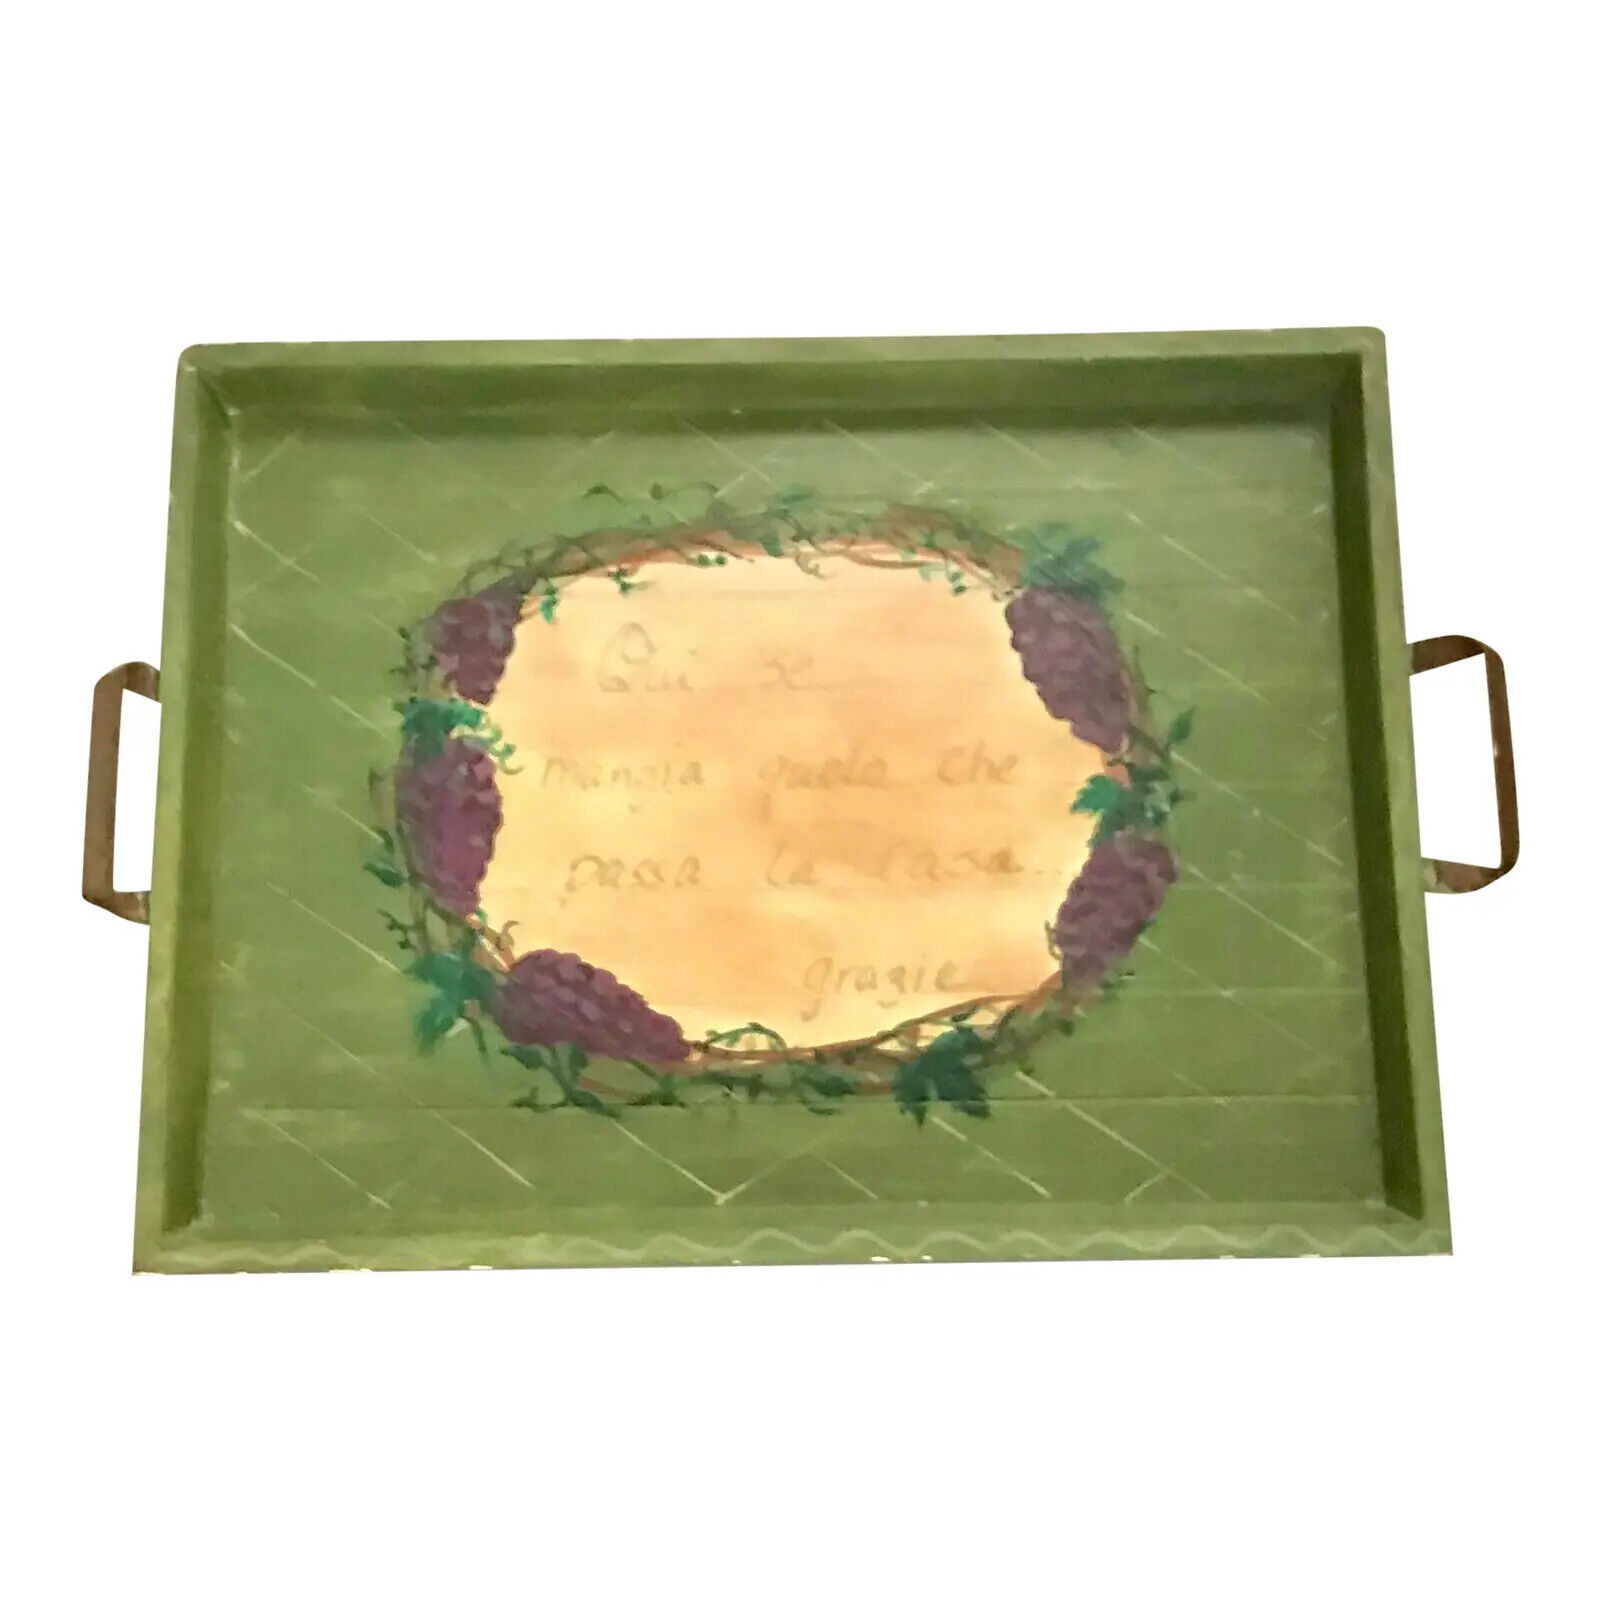 Vintage Italian Green Wooden Tray With Metal Handles